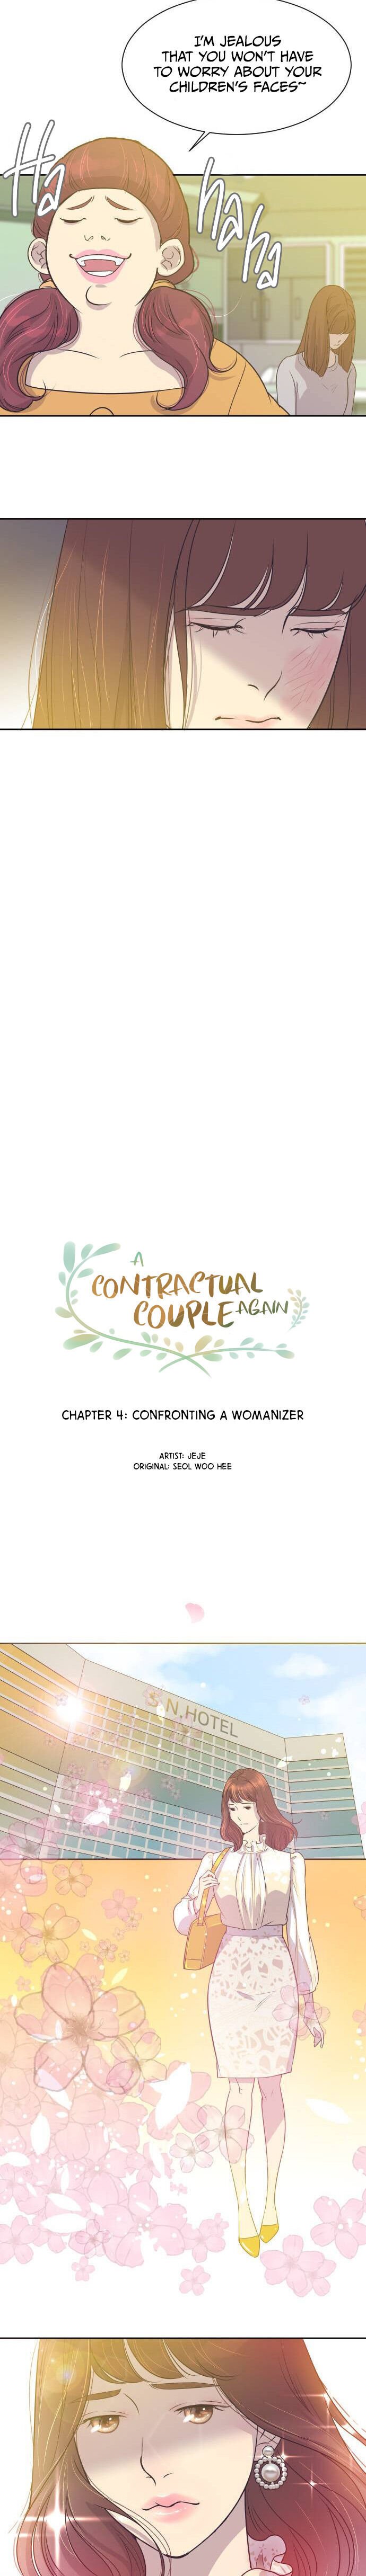 A Contractual Couple Again chapter 4